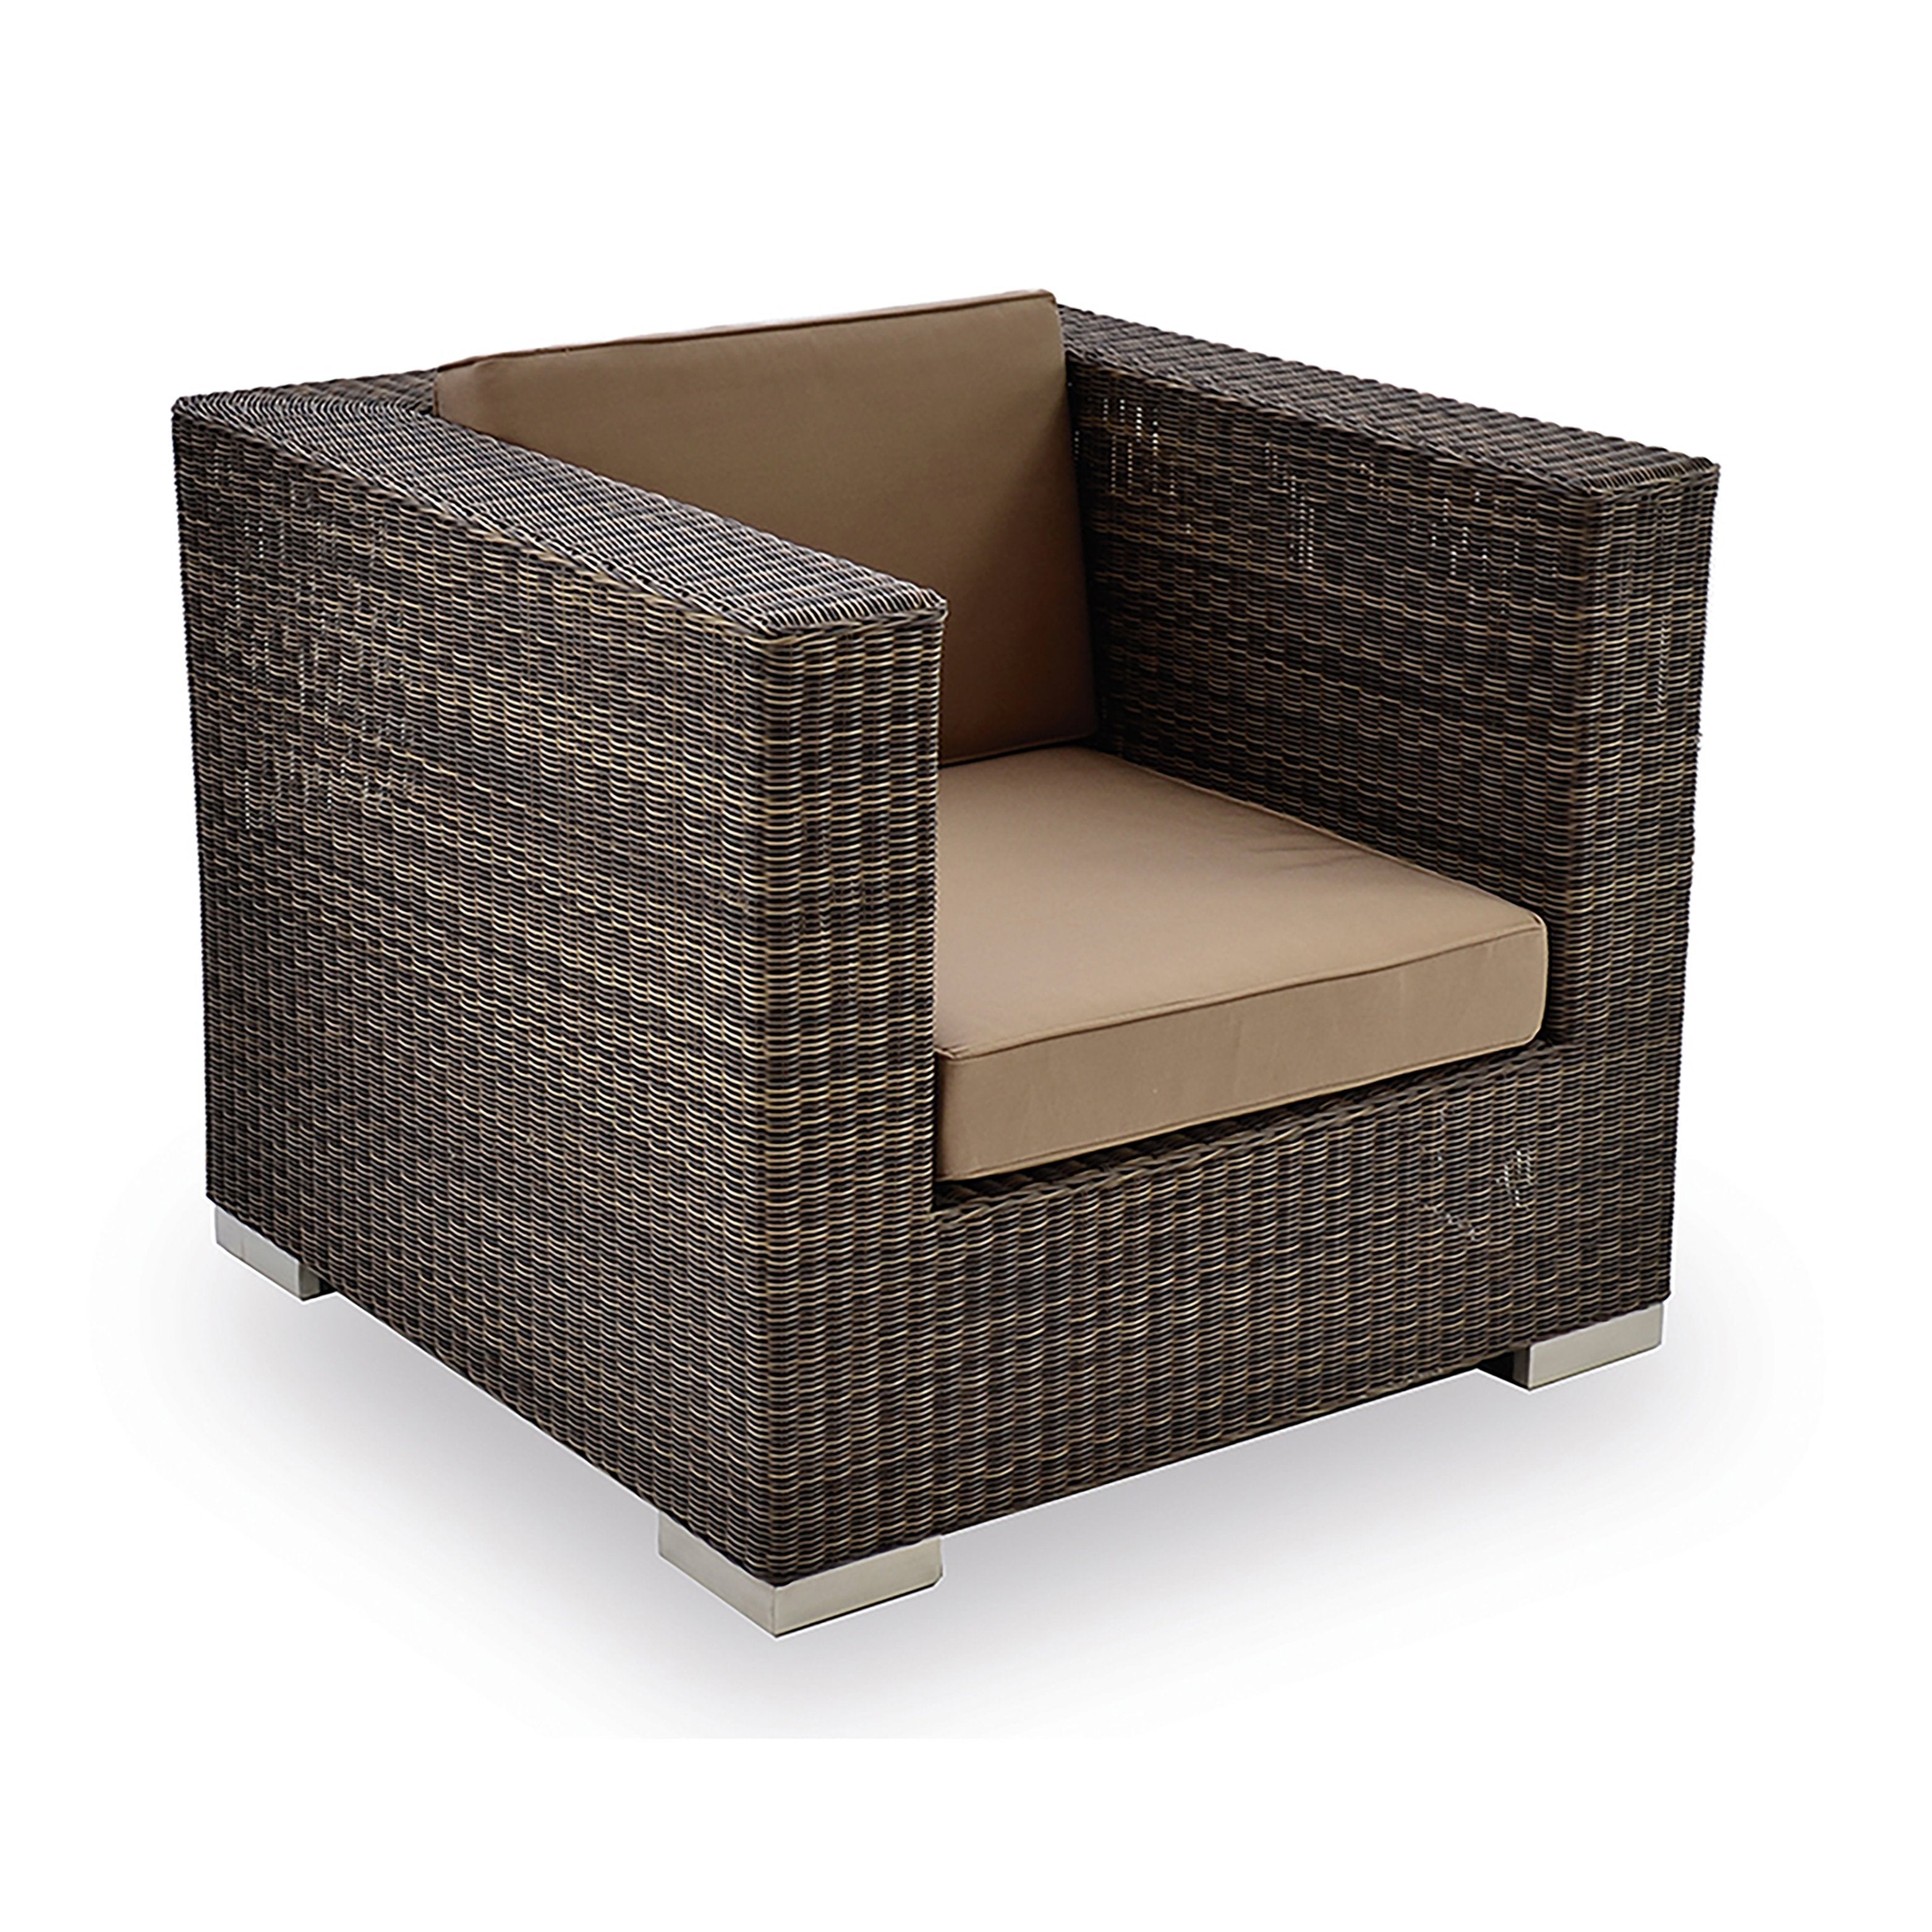 Cuba lounge chair in brown weave